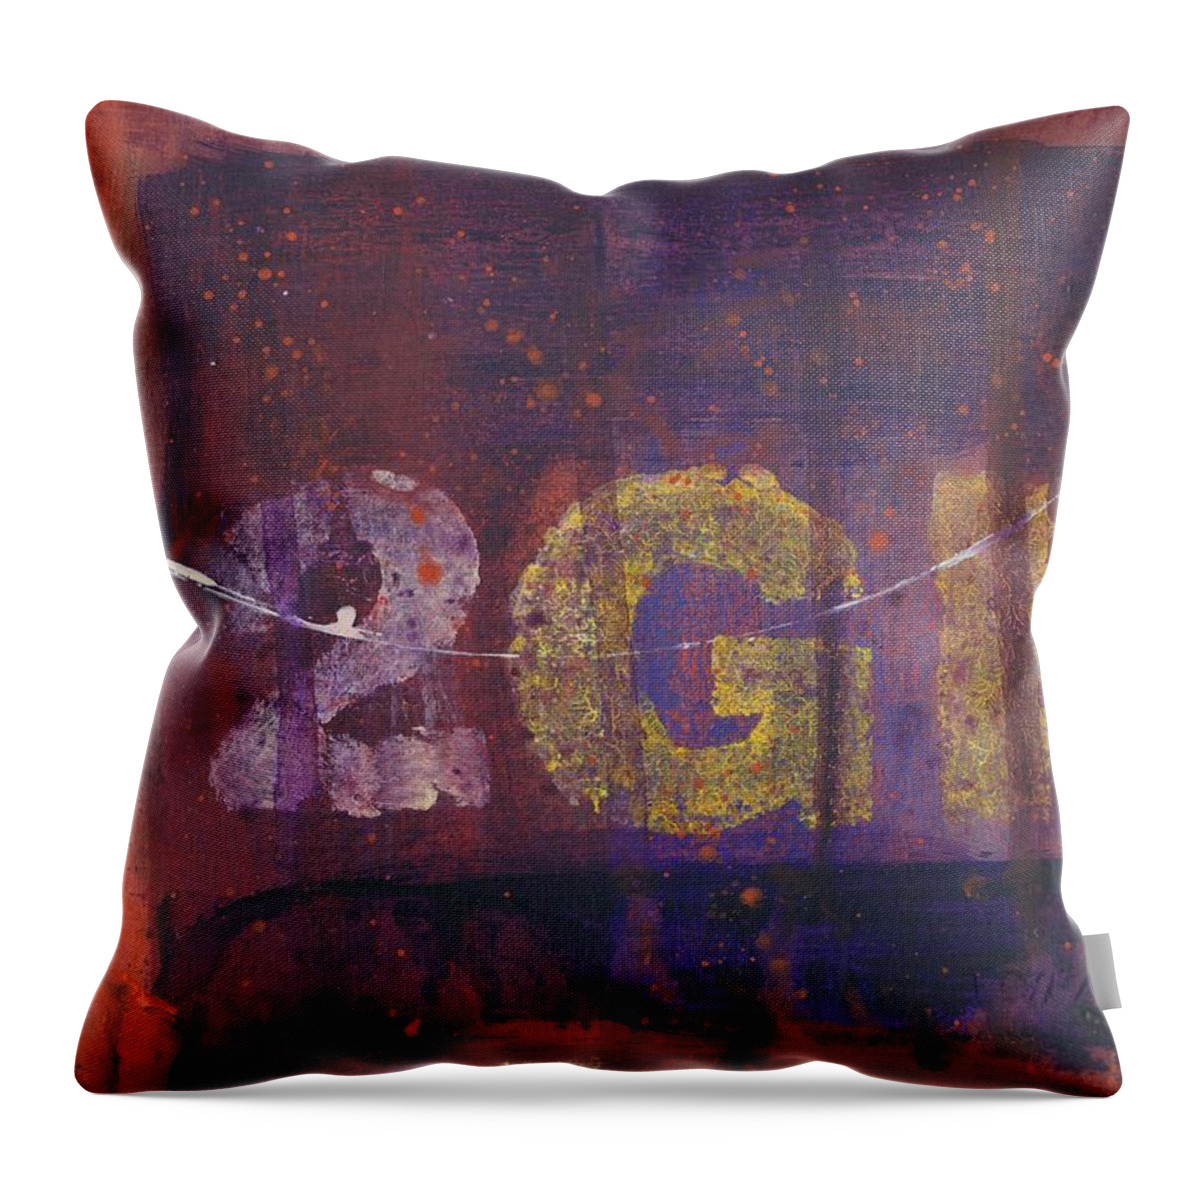 Day 81 Throw Pillow featuring the painting Golf Hotel by Bill Tomsa